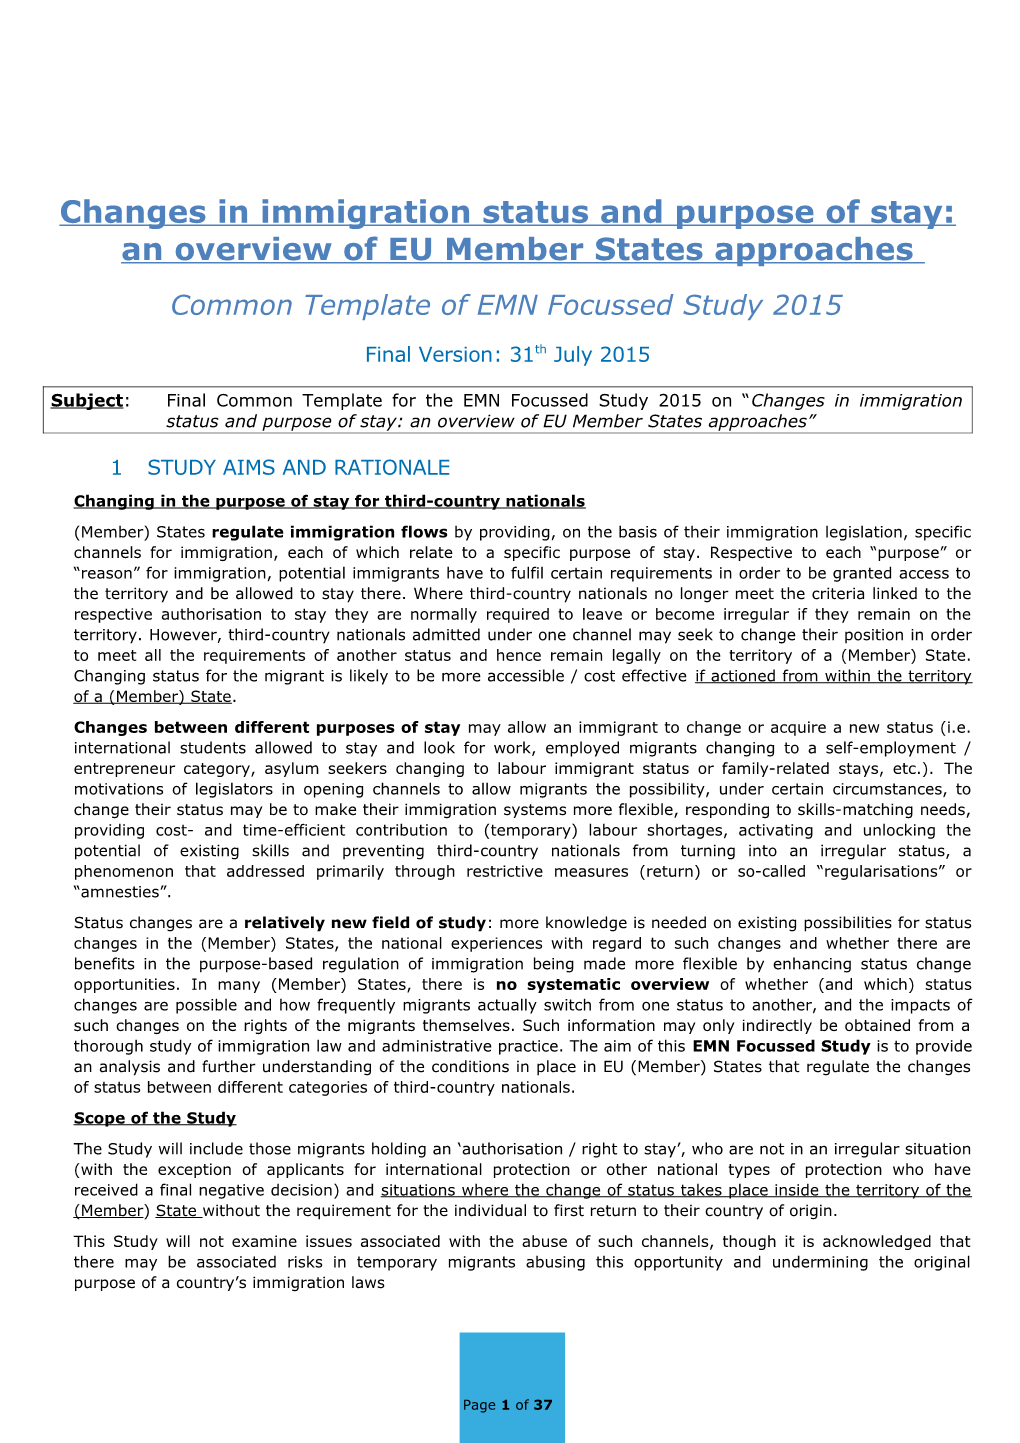 Changes in Immigration Status and Purpose of Stay: an Overview of EU Member States Approaches